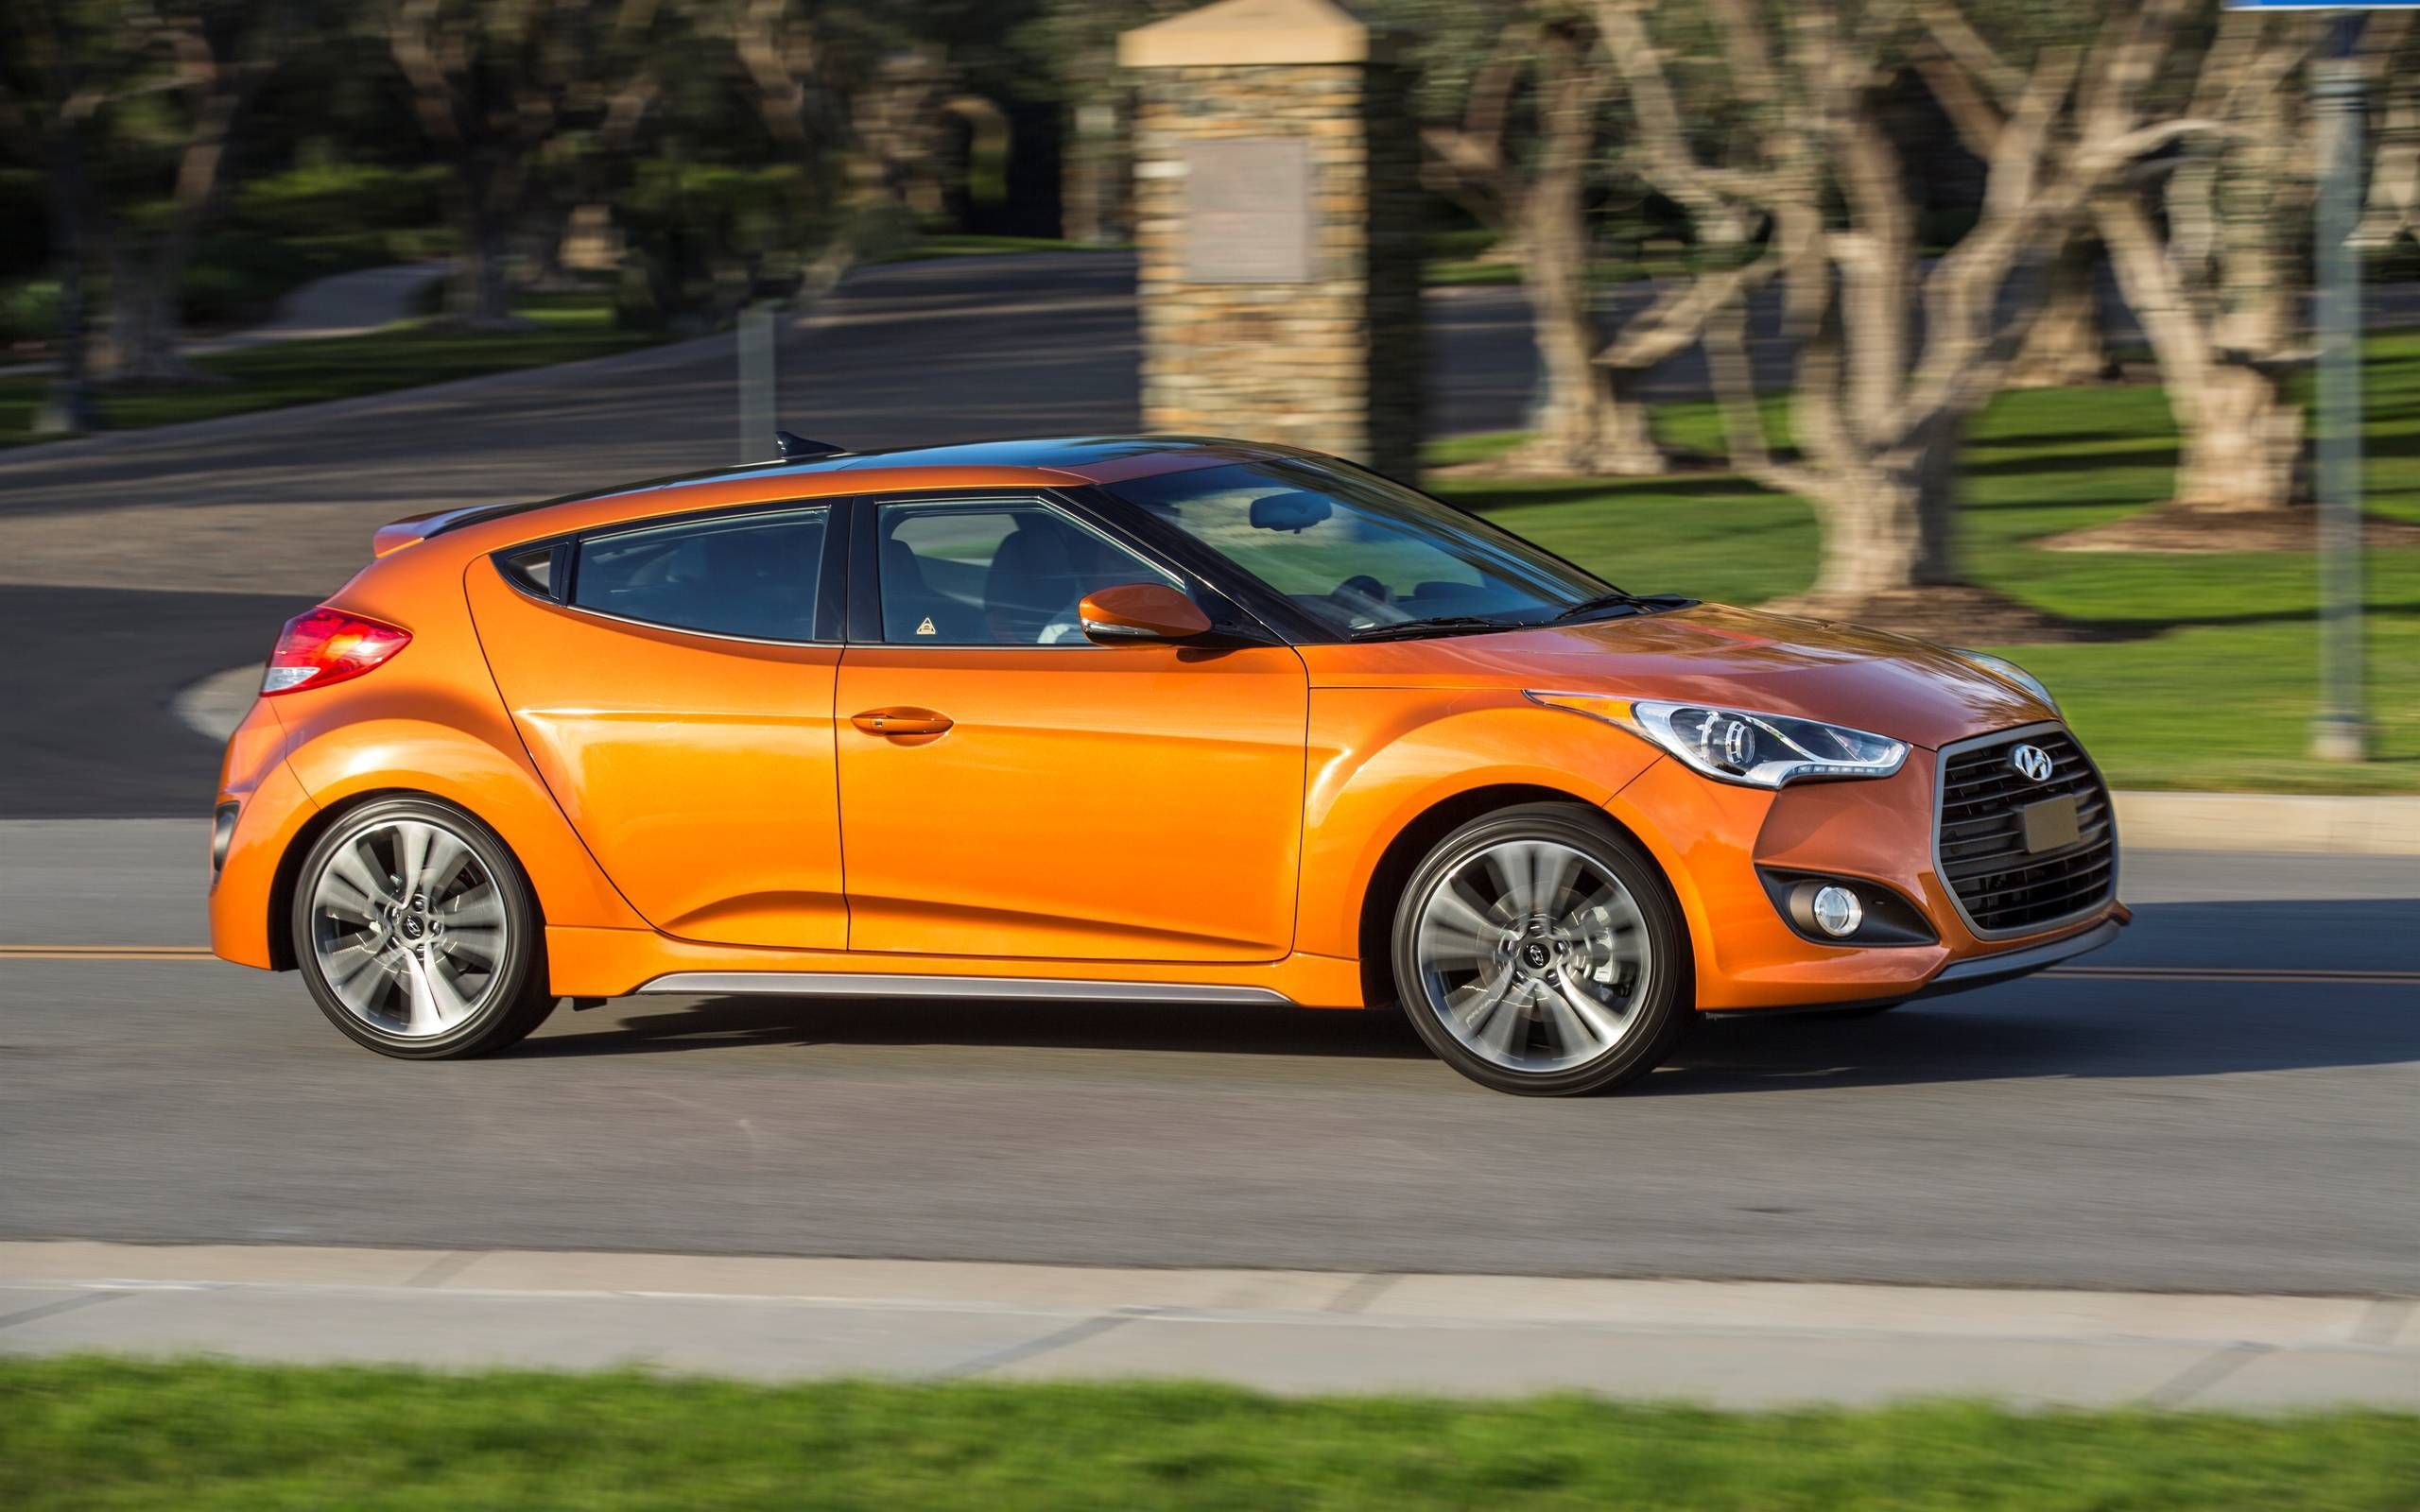 2016 Hyundai Veloster review: Everything a growing family needs